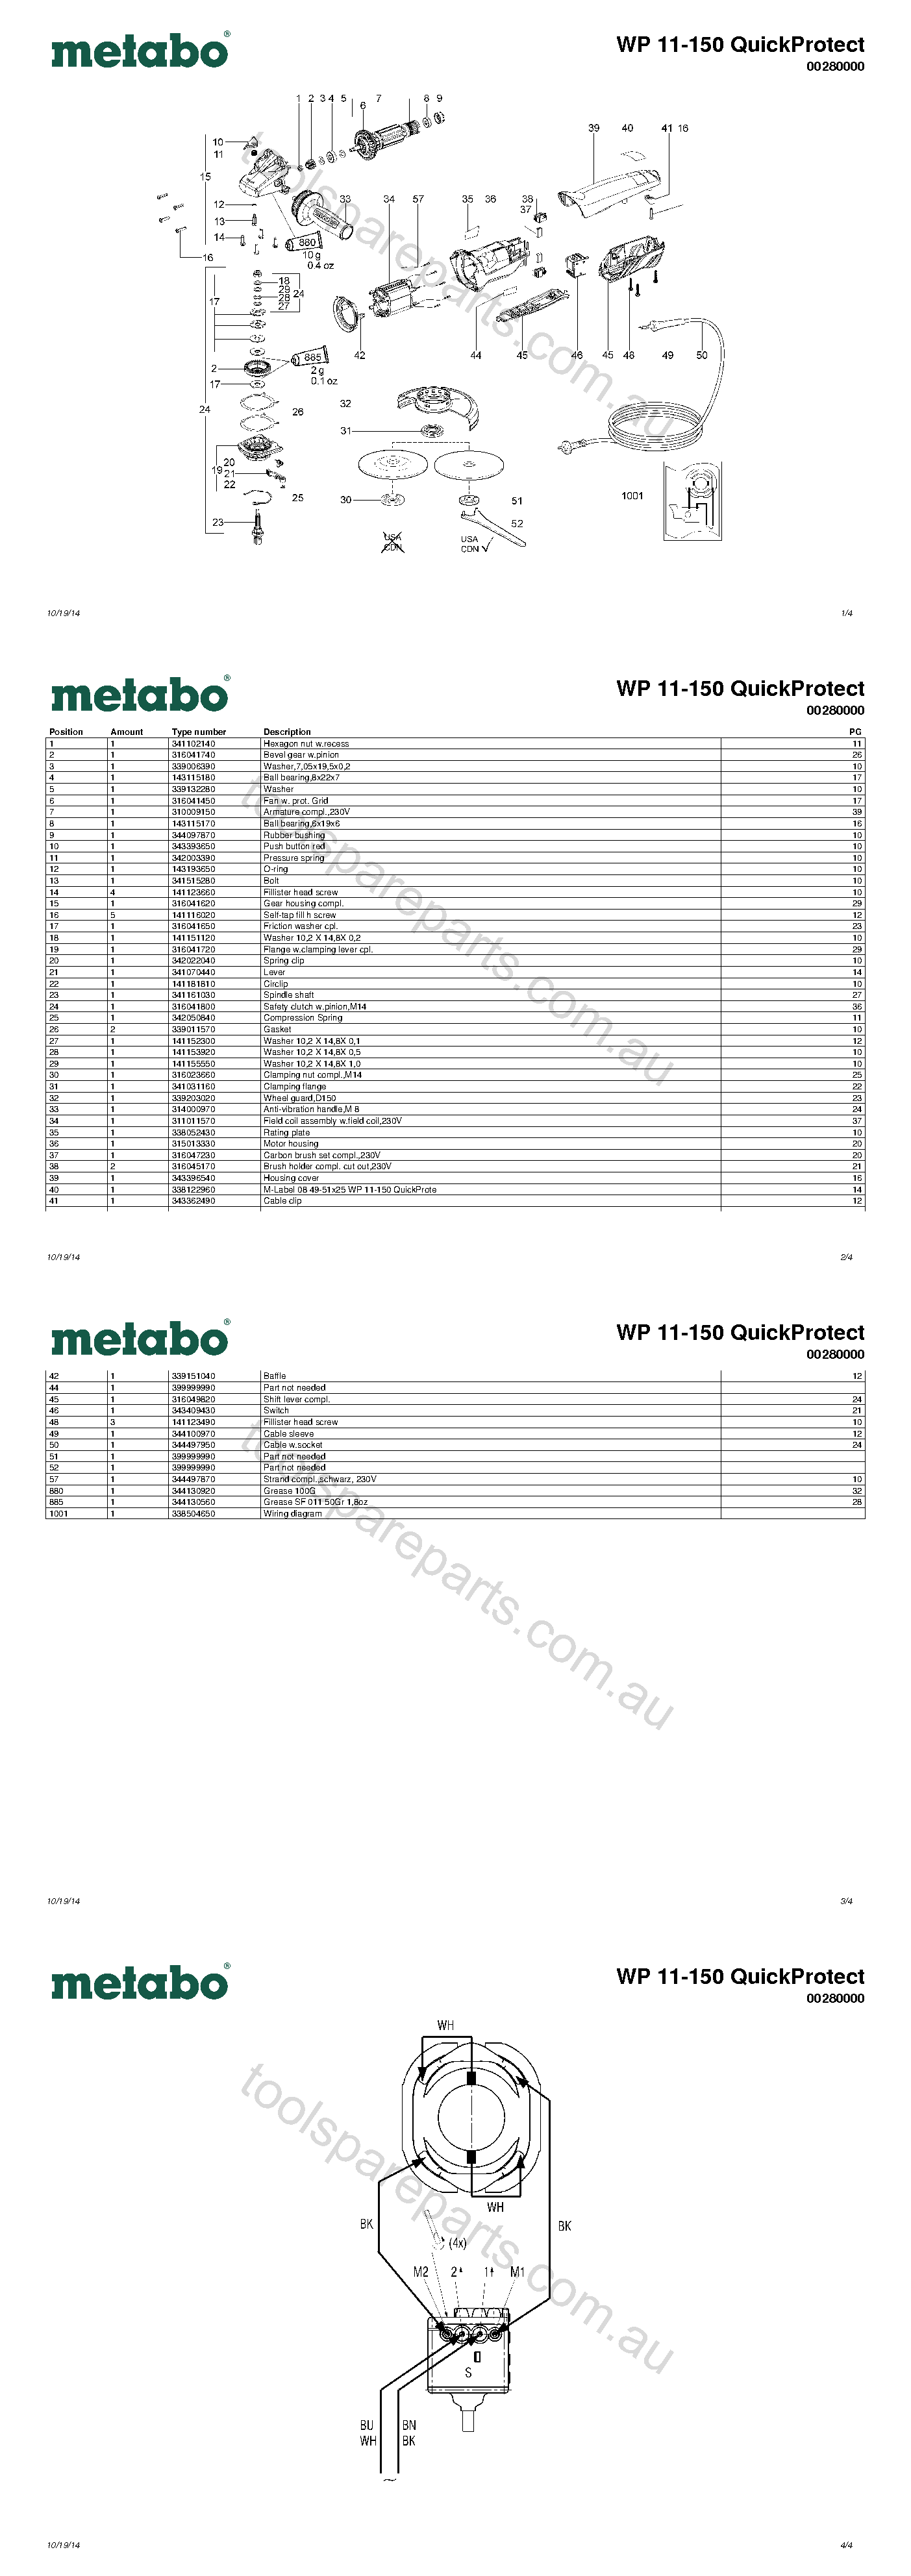 Metabo WP 11-150 QuickProtect 00280000  Diagram 1